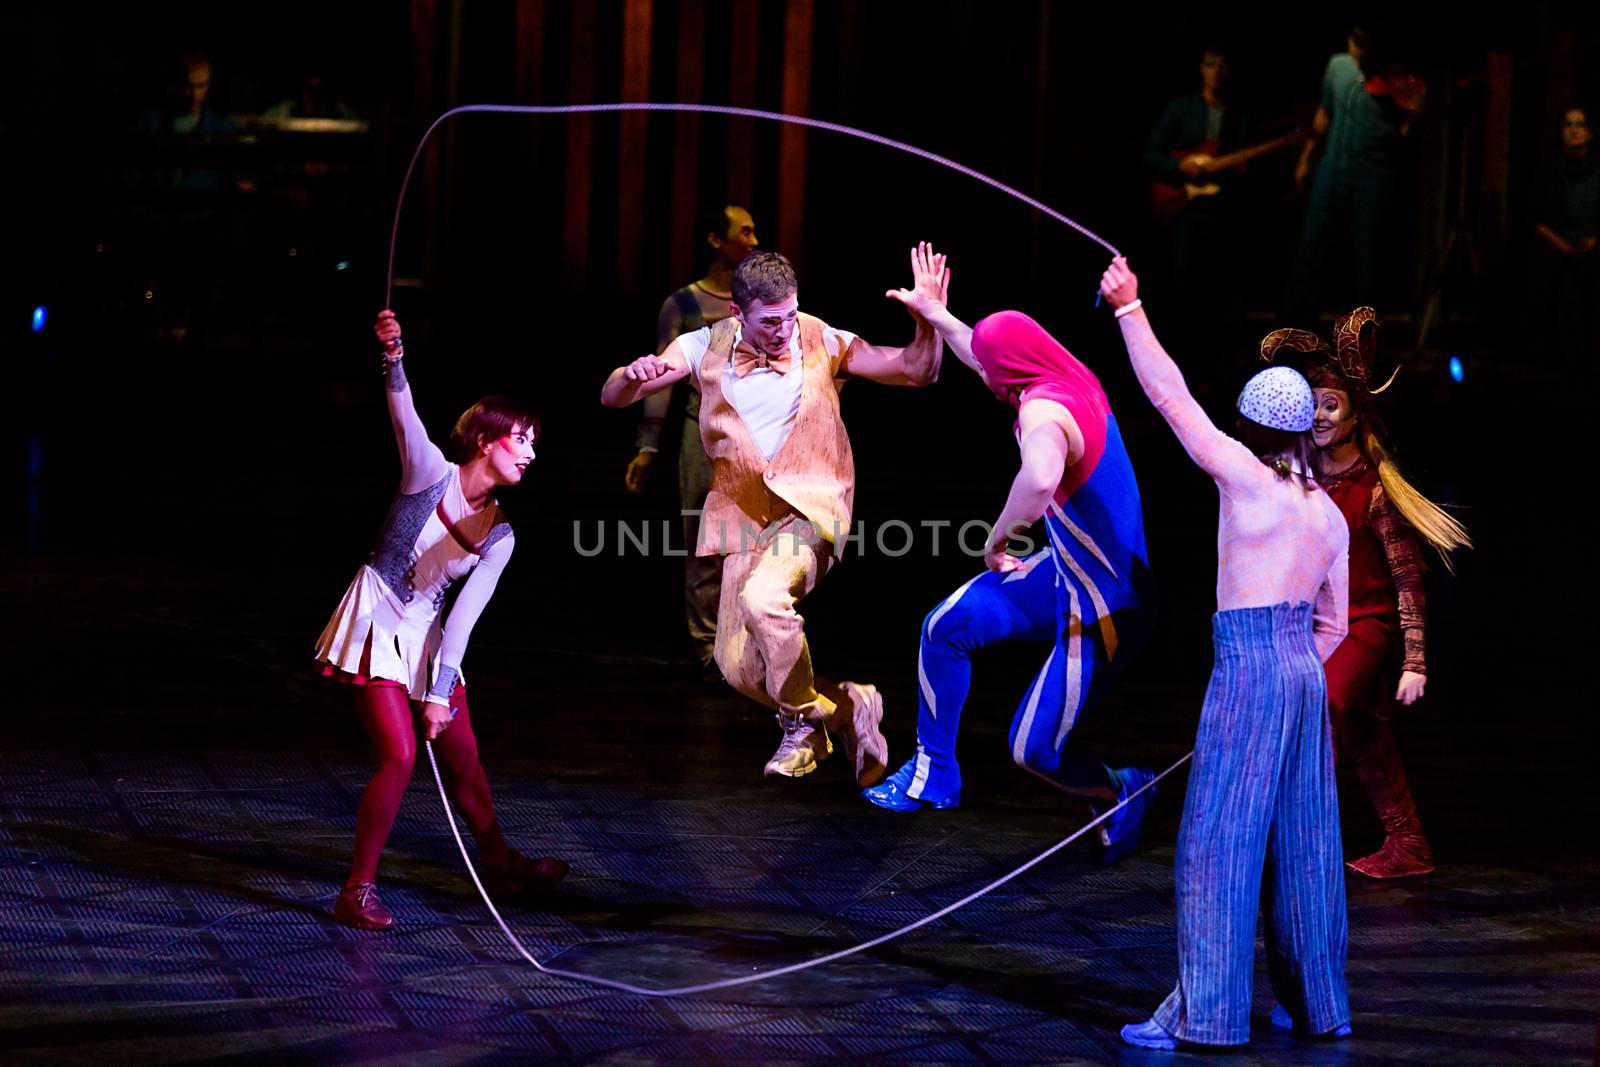 Performers skipping Rope at Cirque du Soleil's show 'Quidam' by ververidis